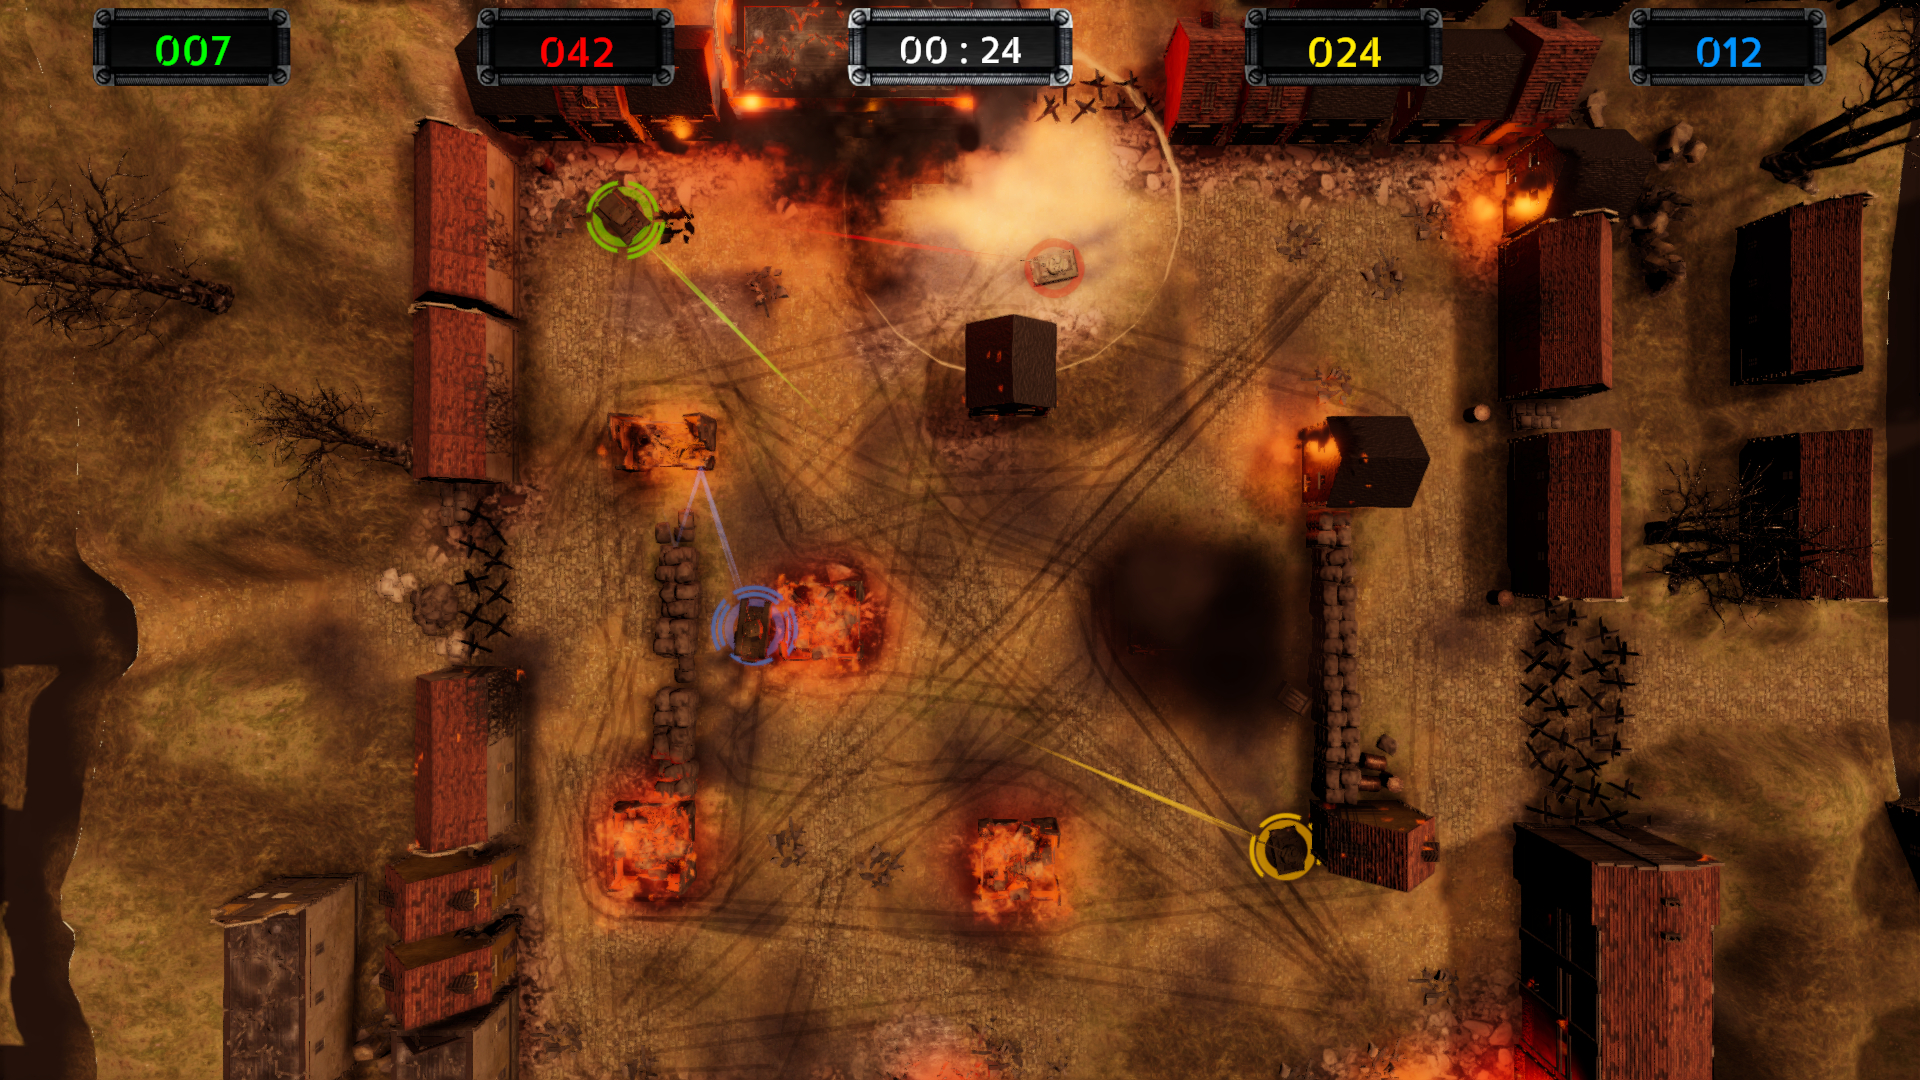 A screenshot of a match of Armor of Heroes, showing four tanks skirmishing